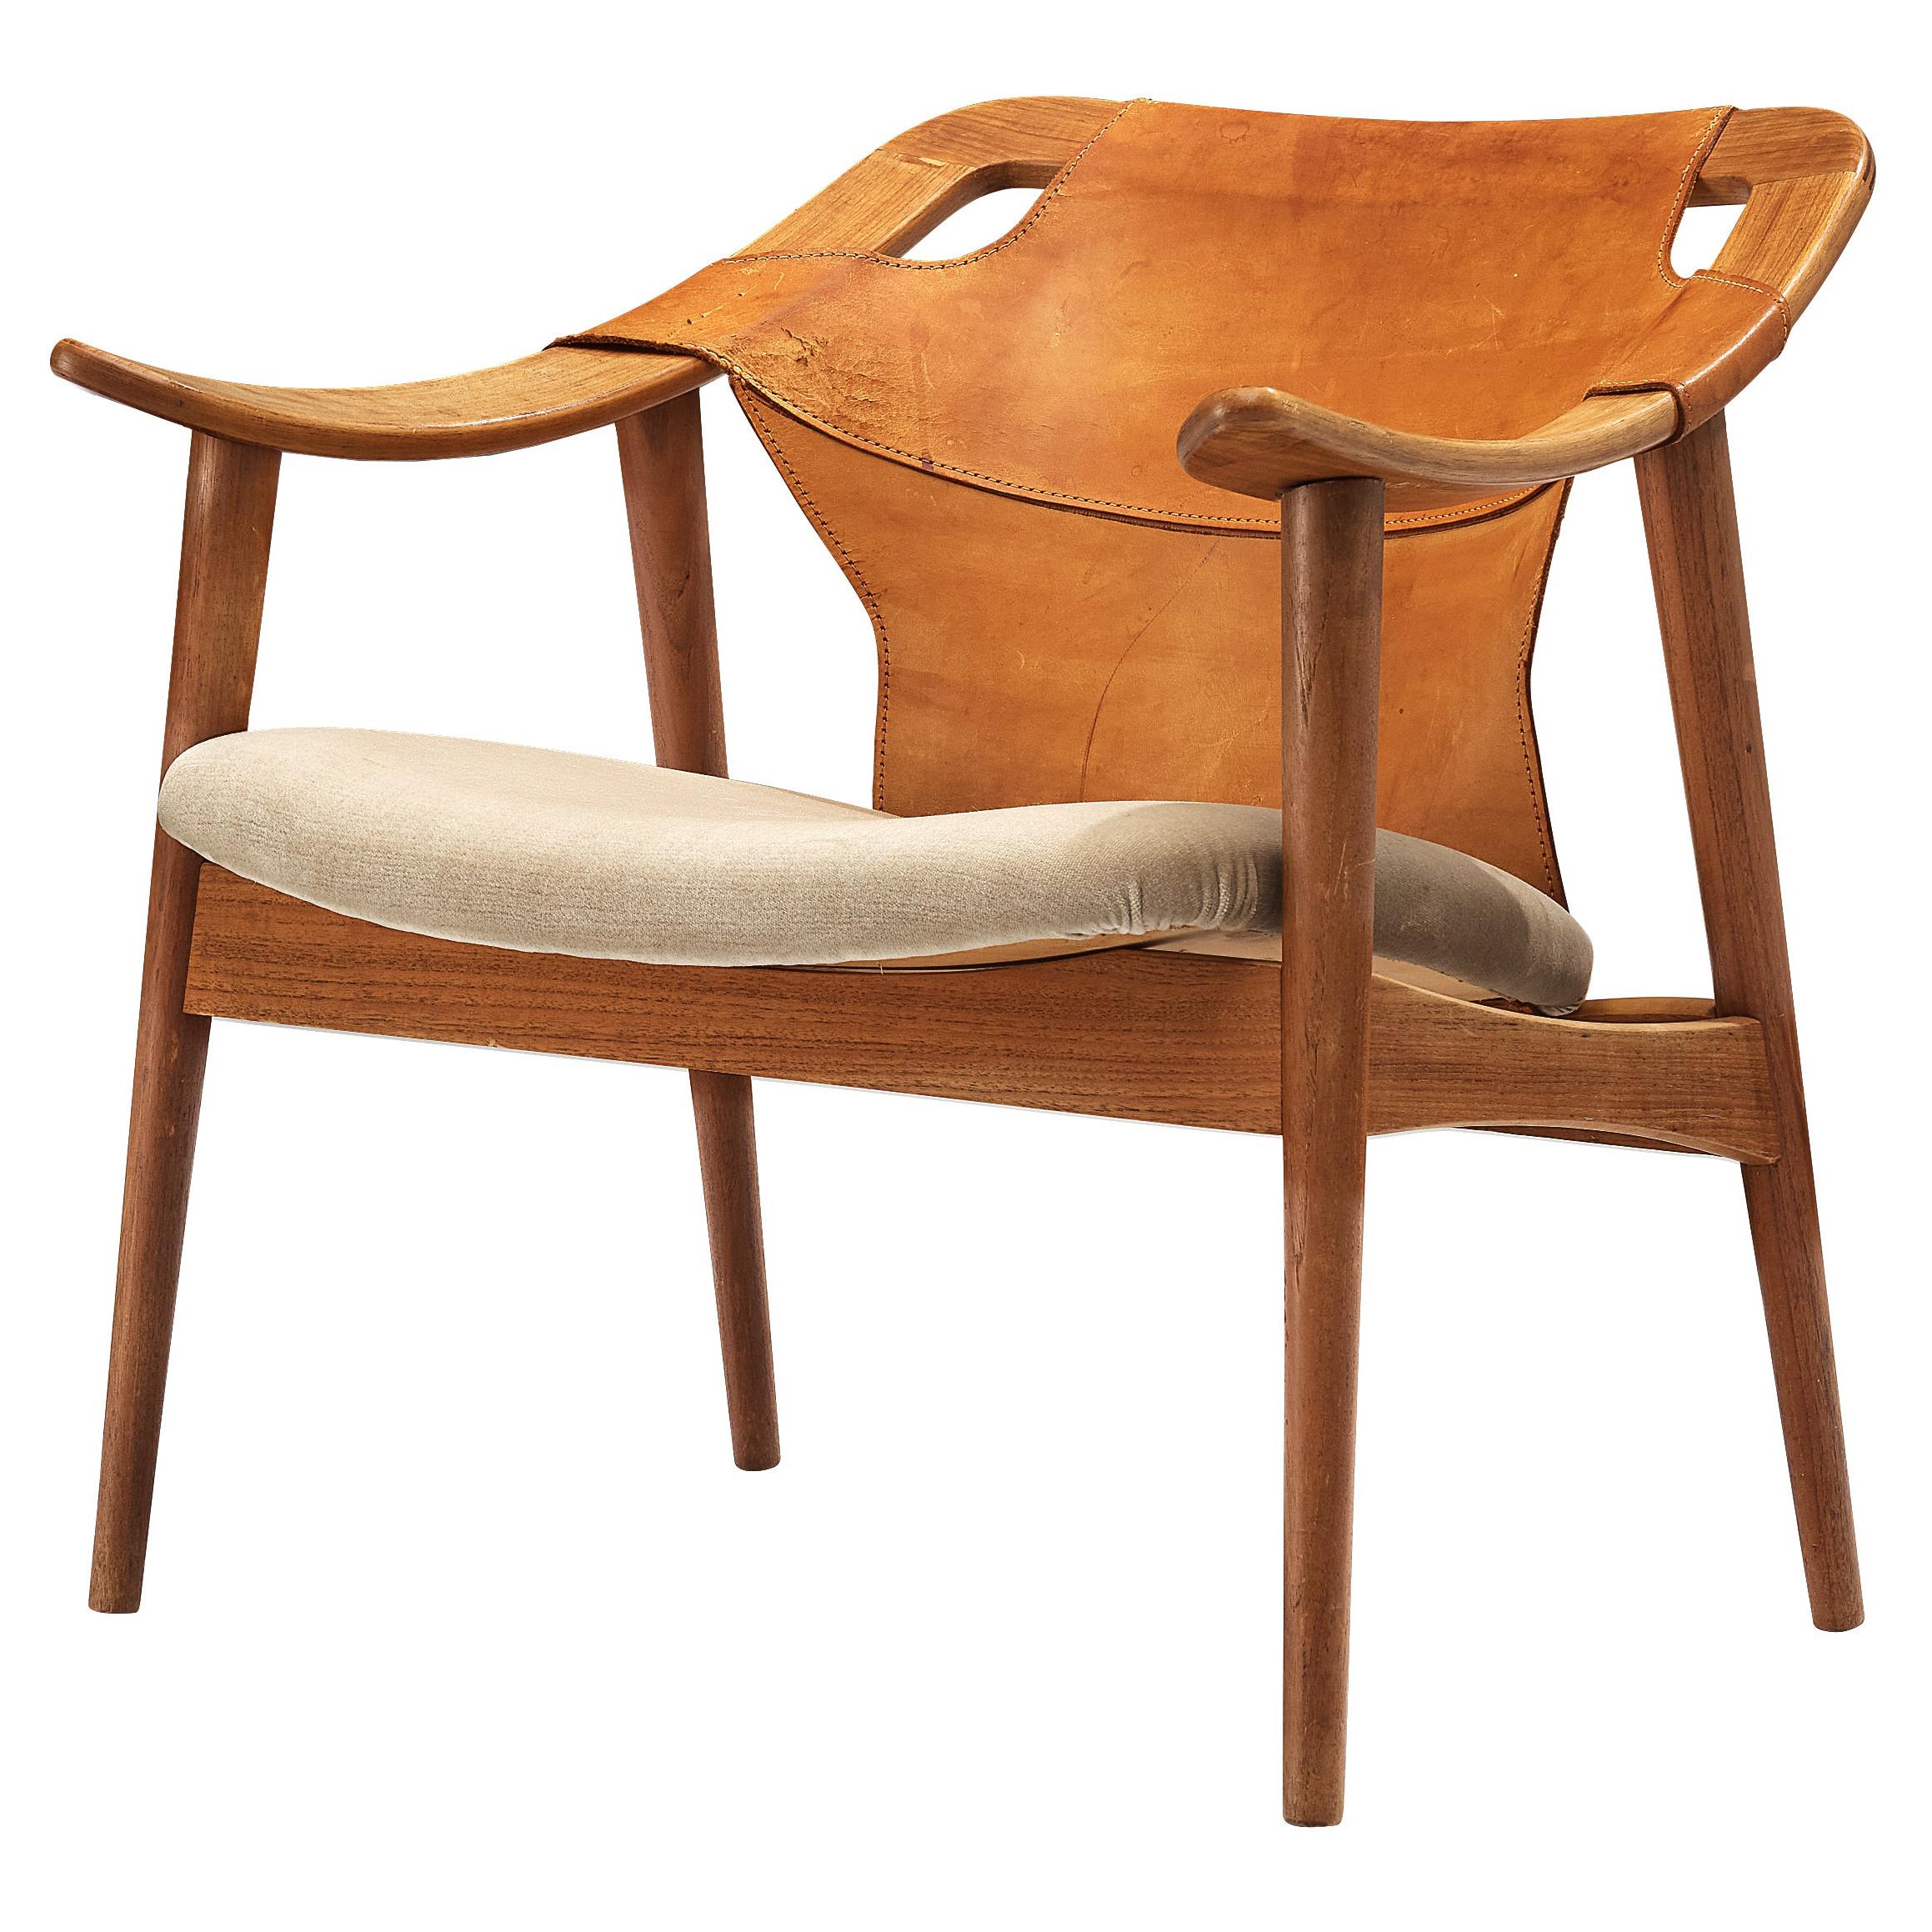 Arne Tidemand Ruud Armchair Model '3050' in Leather and Oak